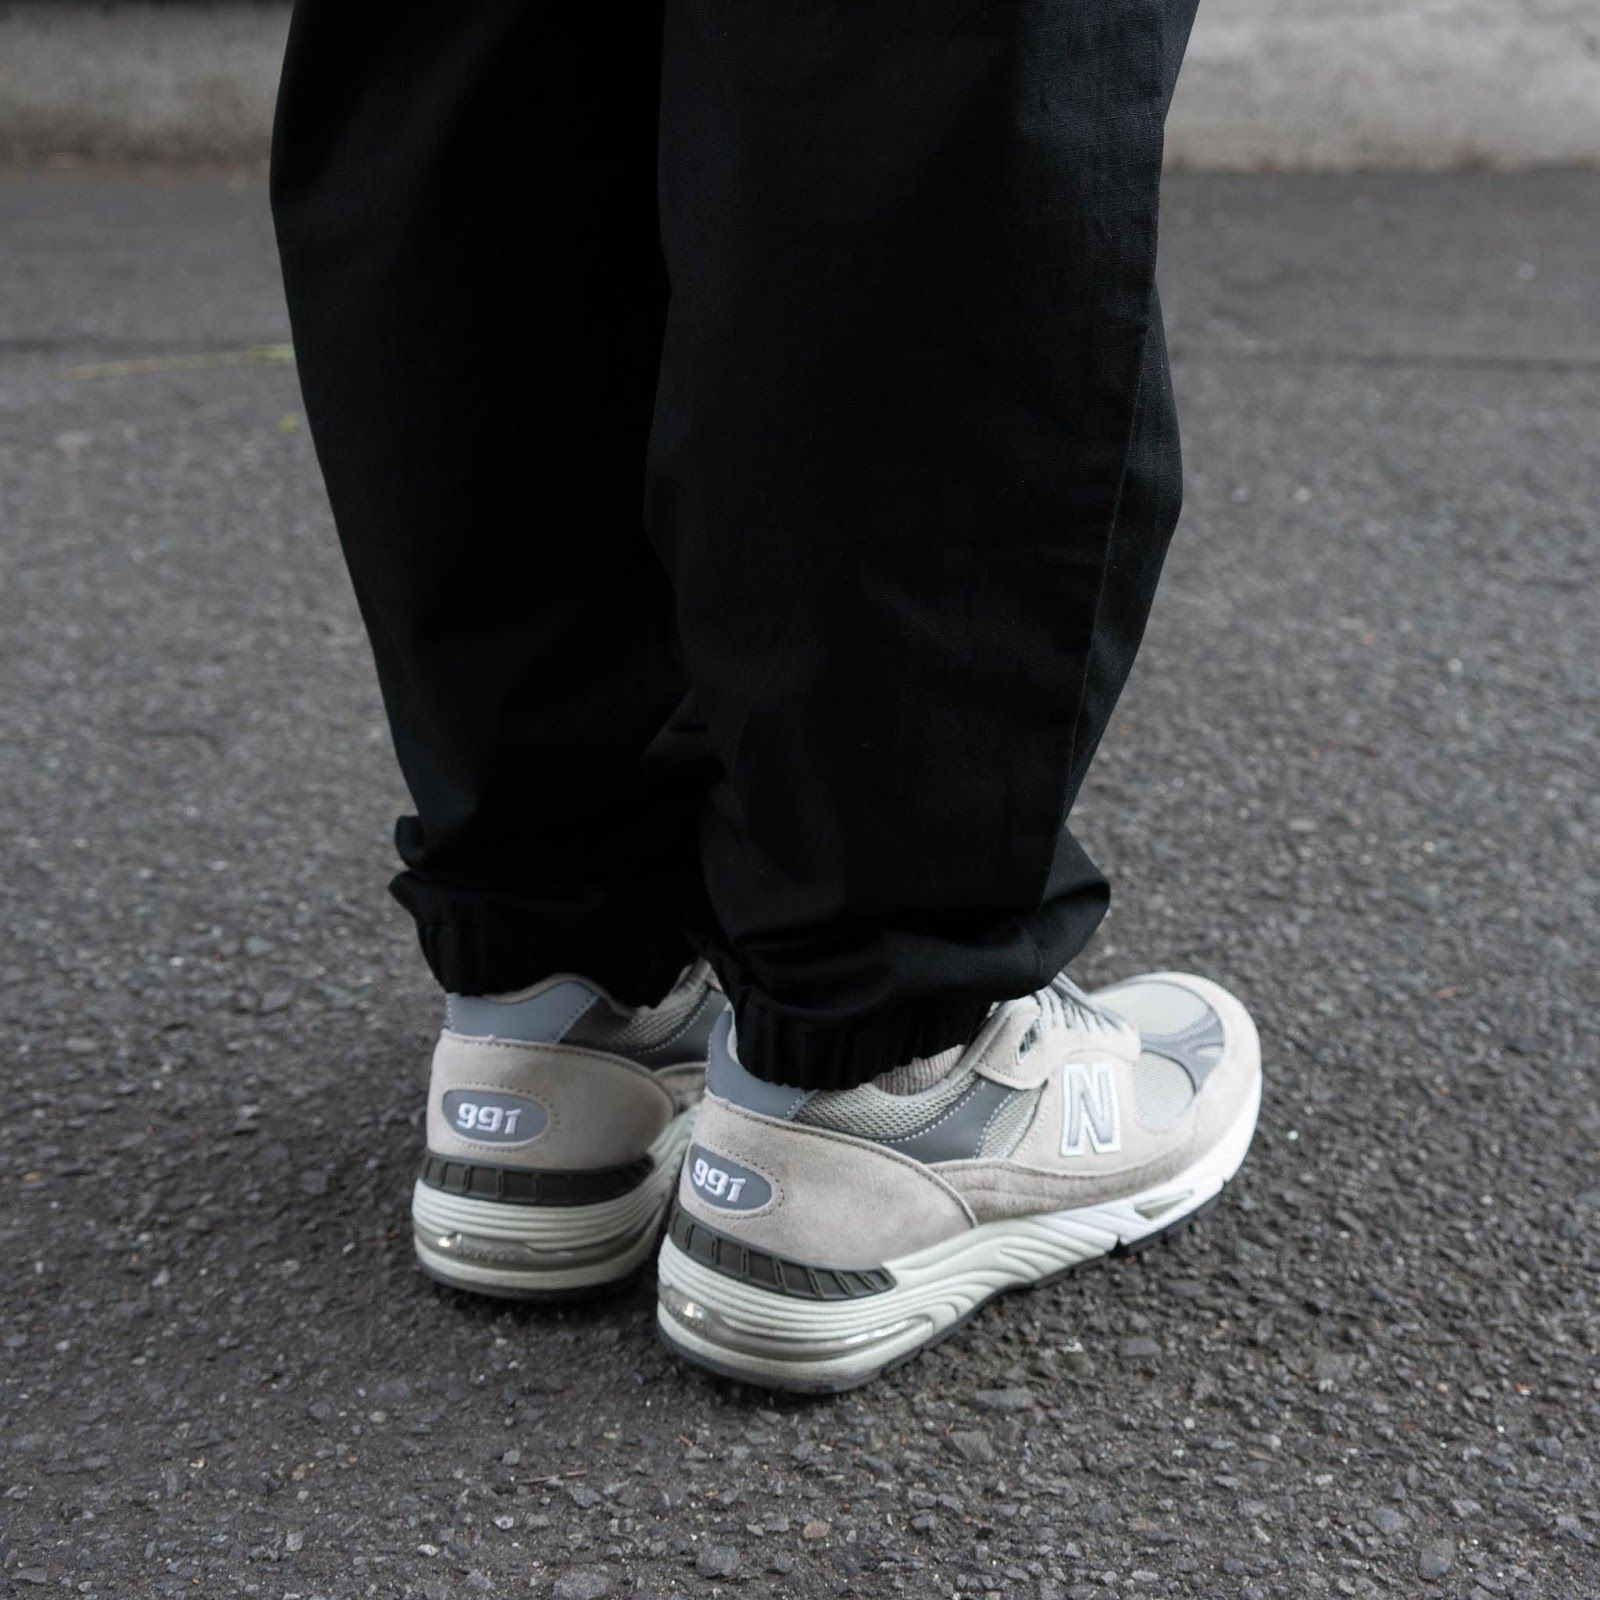 CUP AND CONE: Cotton Ripstop Track Pants